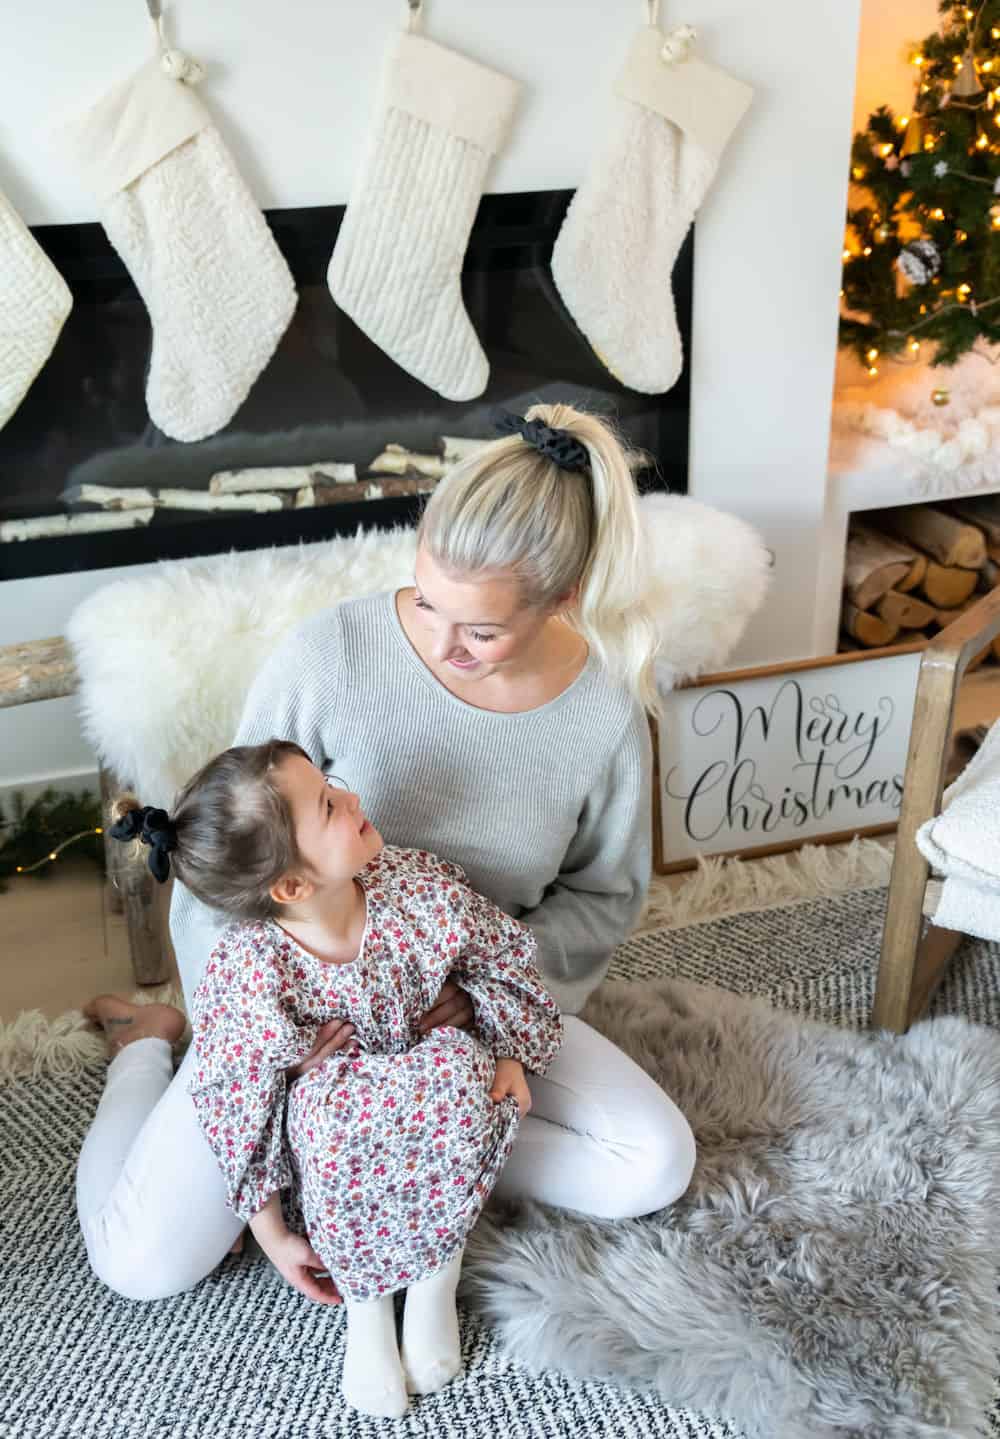 A Christmas family photo of a mom wearing white pants and a grey sweater and her daughter wearing a floral dress